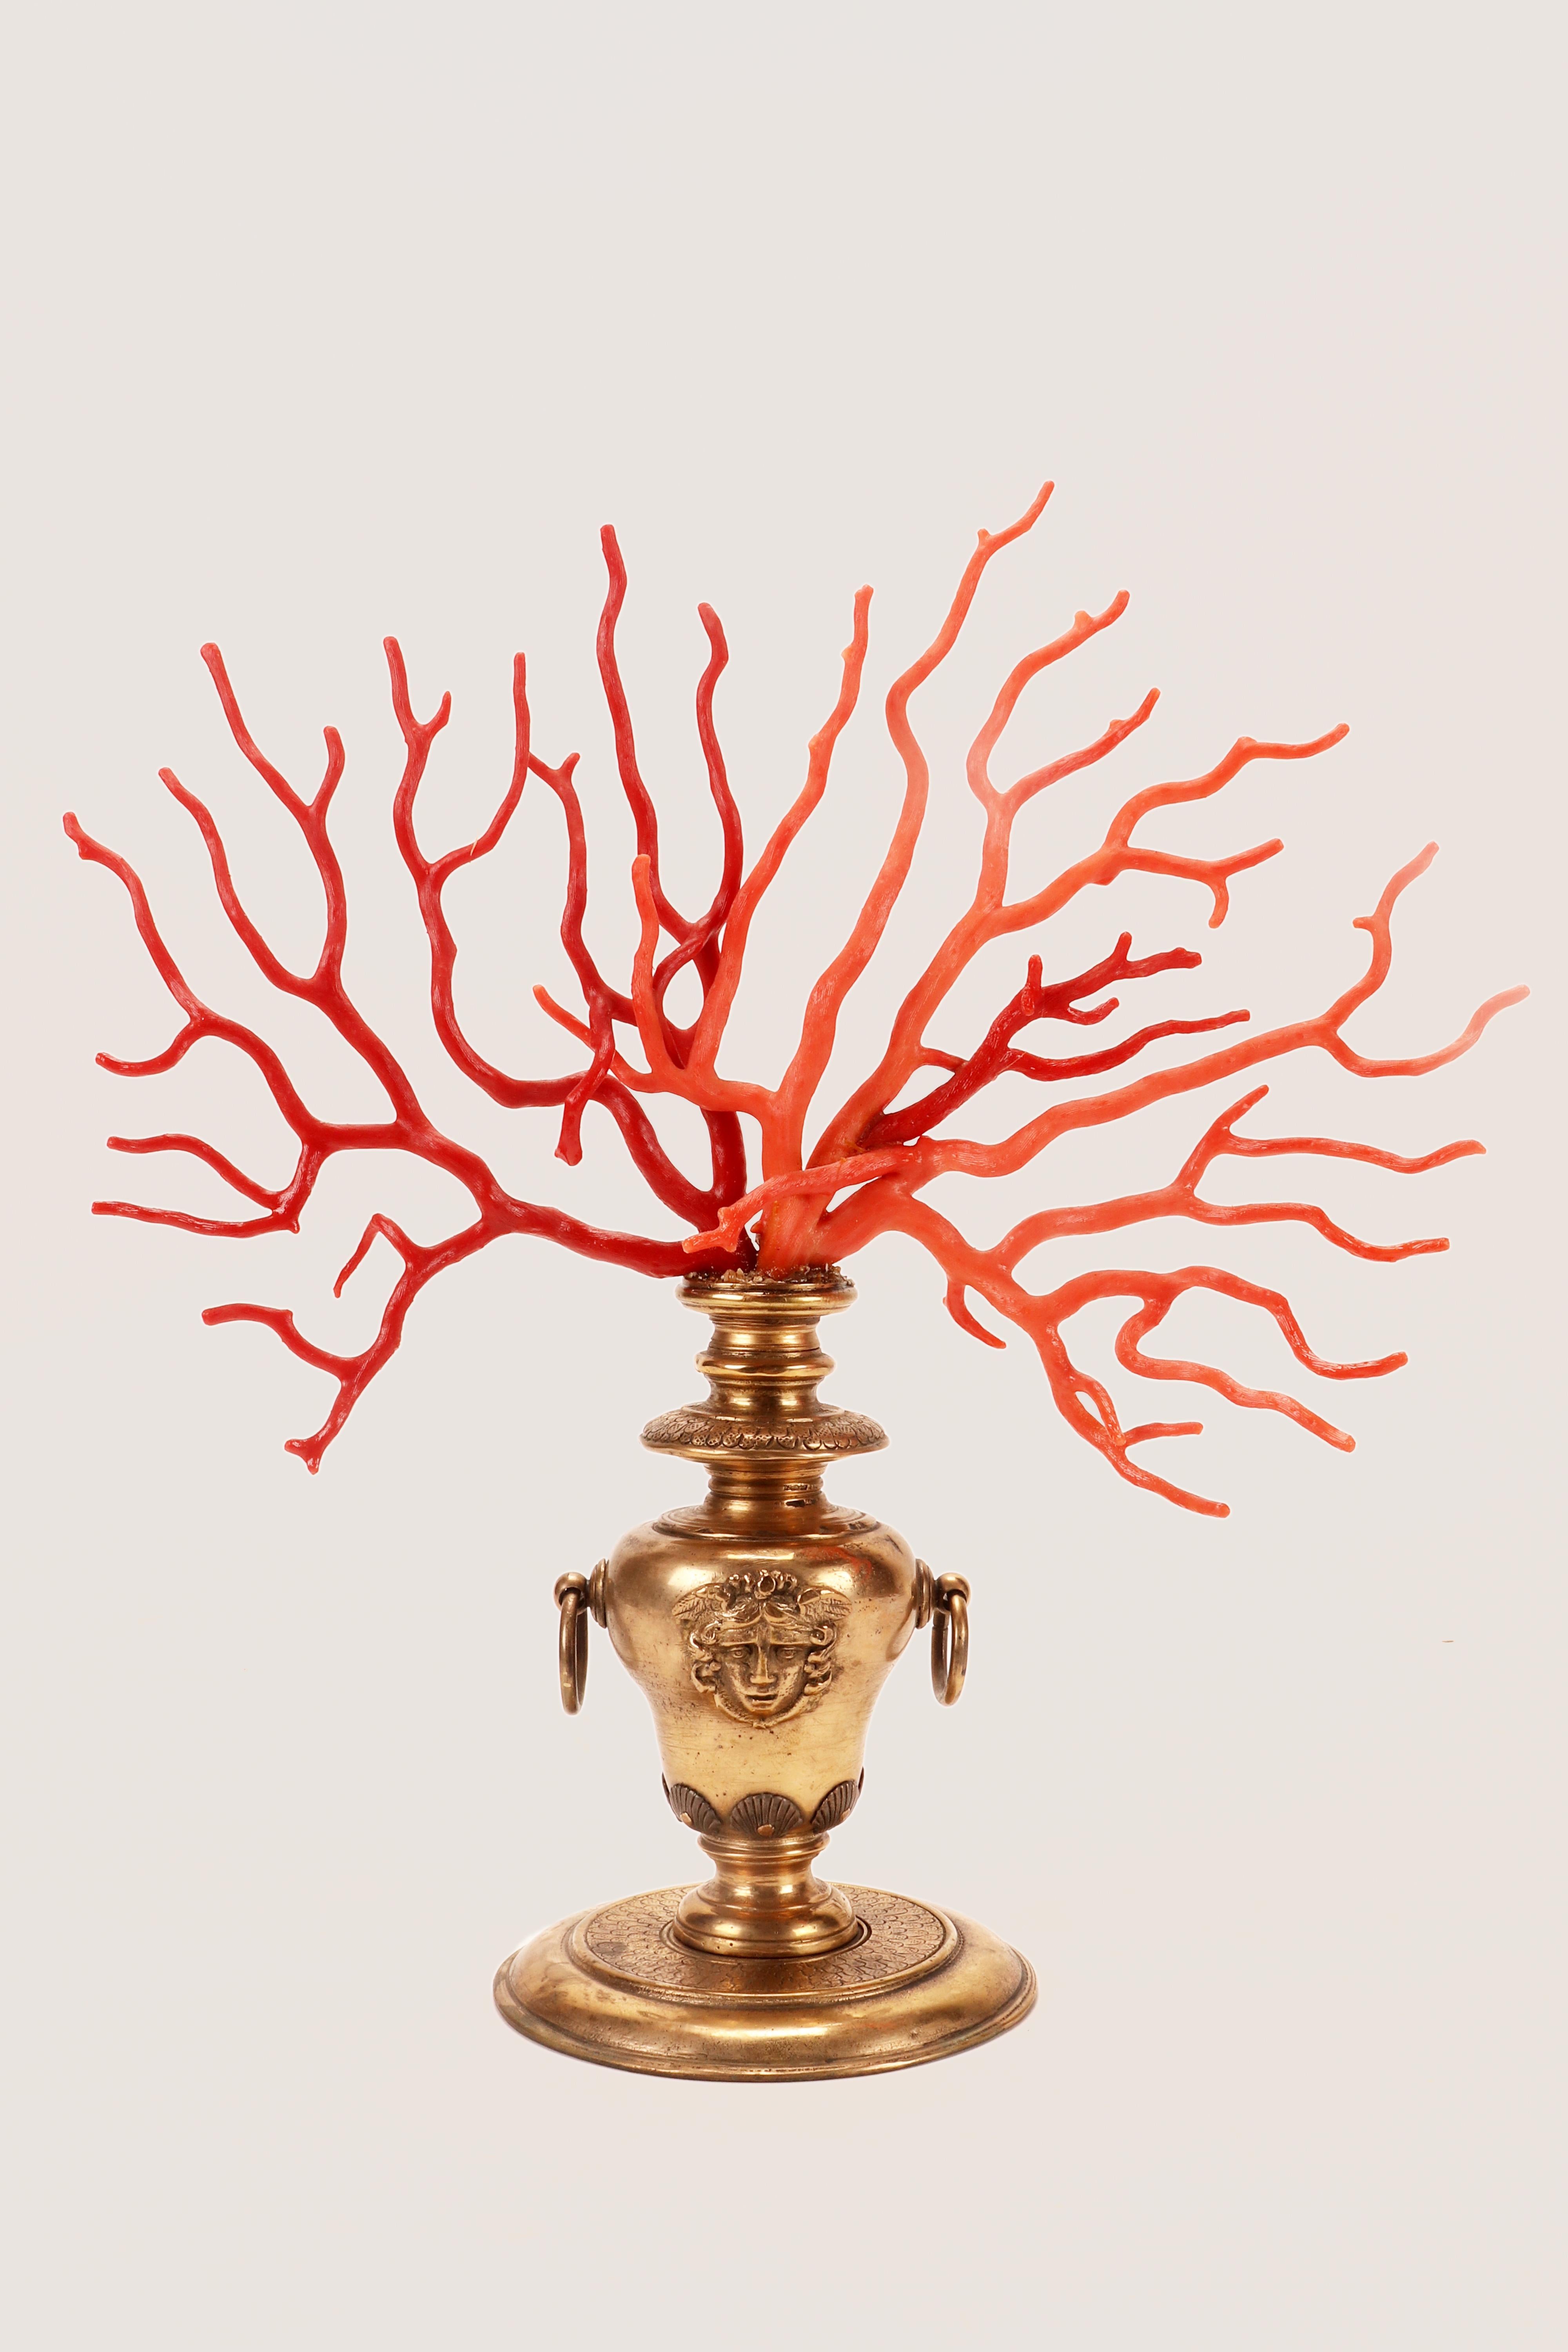 A large branch of Mediterranean red coral (Corallium Rubrum) and a large branch of Sciacca coral, mounted together on a gilt bronze base. The creation of the vase-shaped base involves various techniques: lost wax casting, mold casting, chiseling.